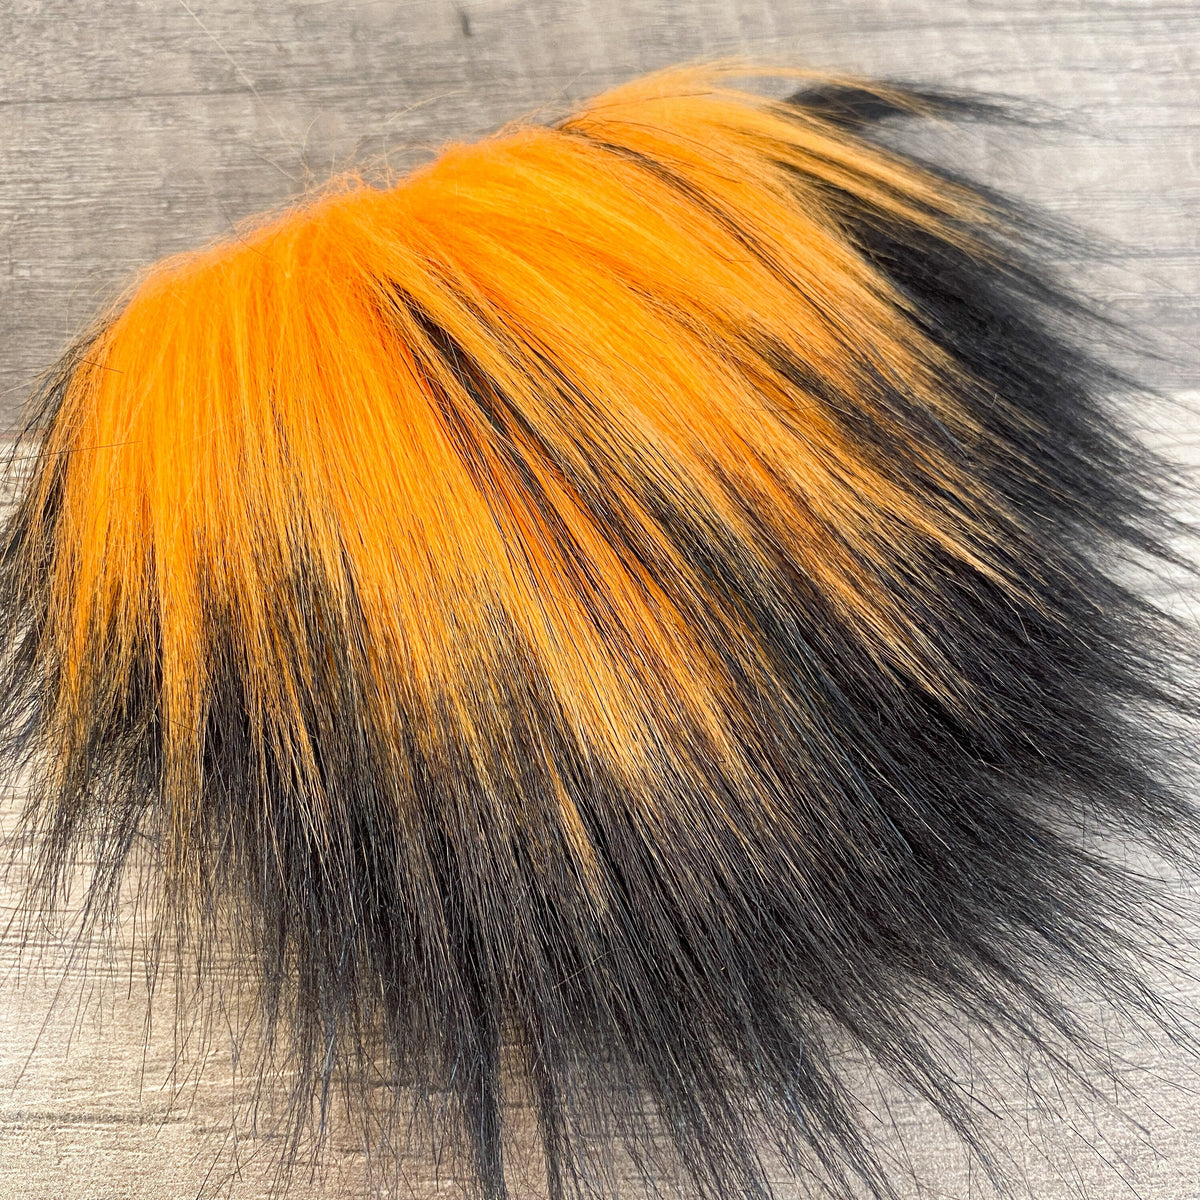 Two Piece Layered Gnome Beard - Black-Tipped Orange Over Straight Black